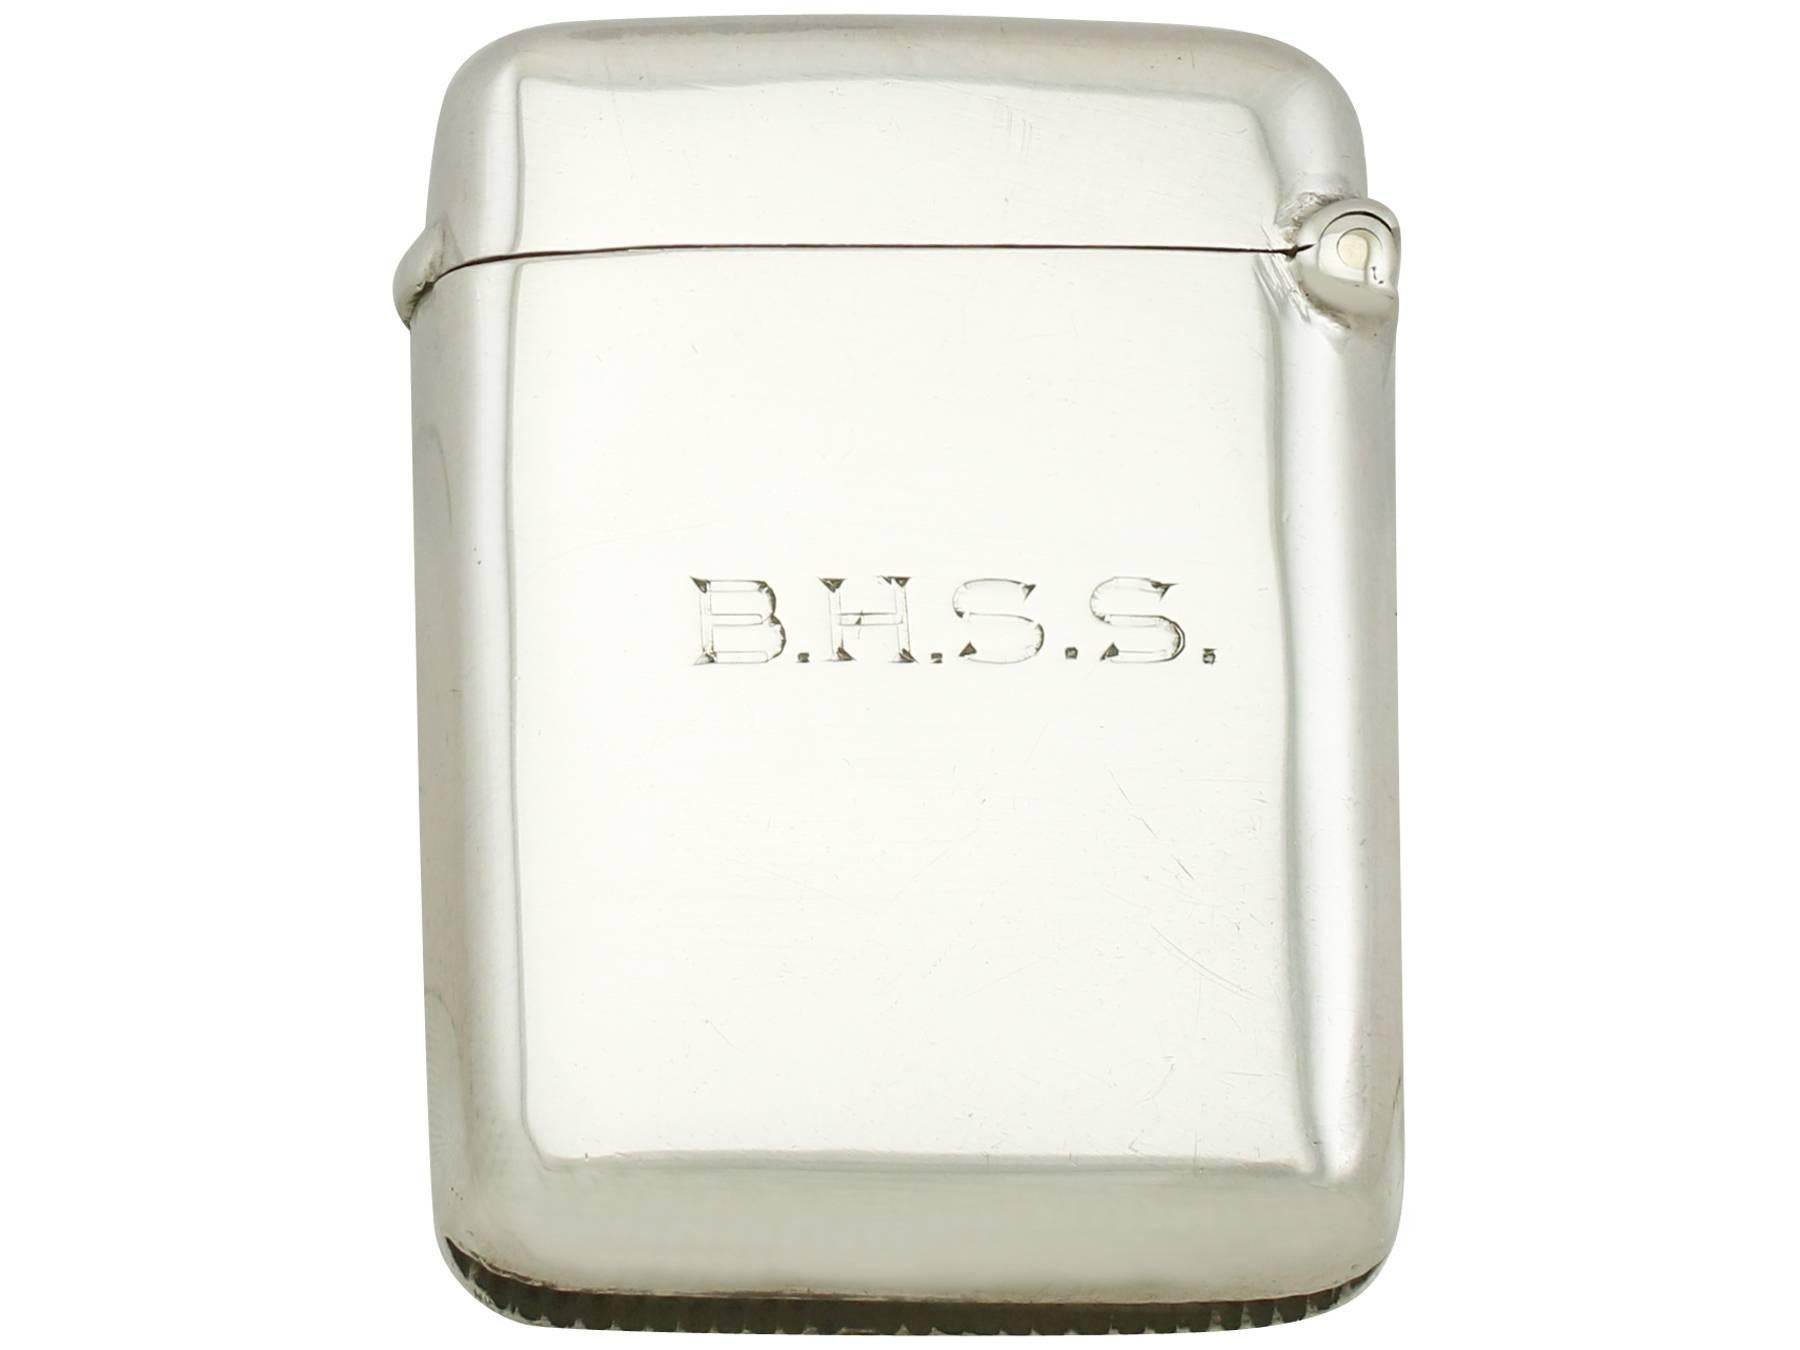 An exceptional, fine and impressive antique Victorian English hallmarked sterling silver compass vesta case; an addition to our boxes and cases collection

This exceptional antique Victorian English sterling silver vesta case has a plain rectangular